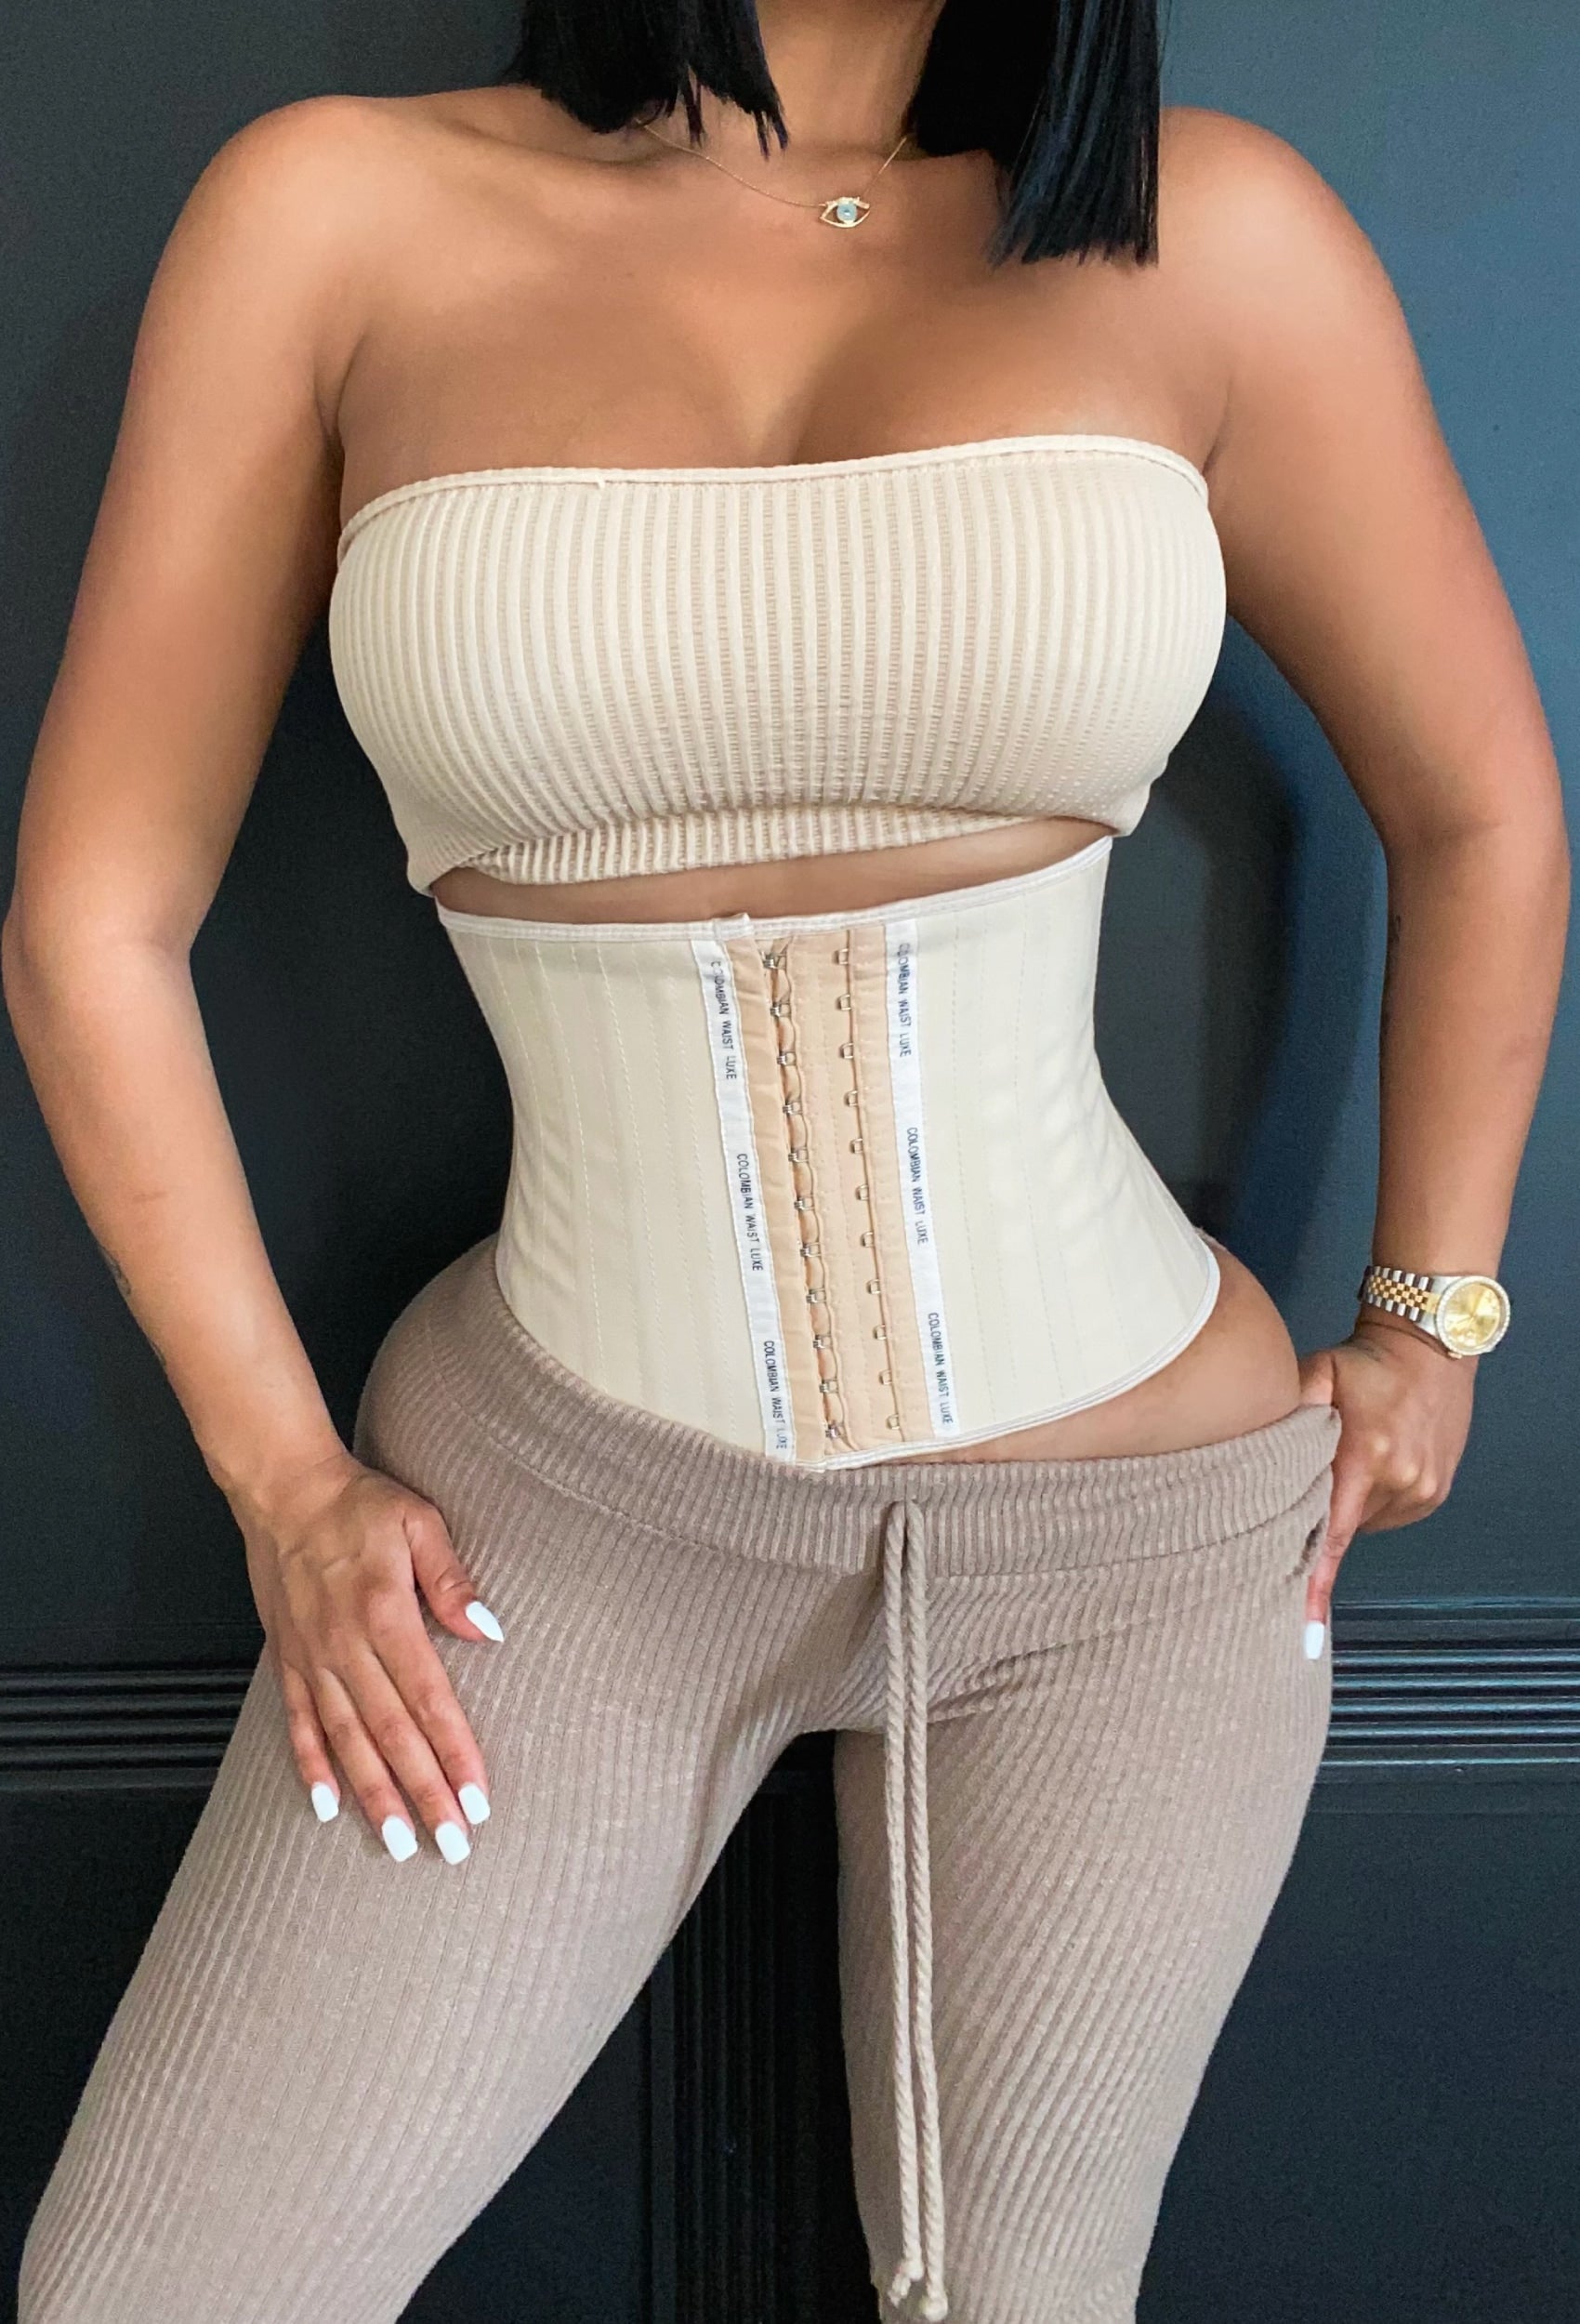 Our shorter version waist trainer, BEBESITA WAIST ✨ ideal for girls with  short torso. Helps after surgery or post birth as they cover a